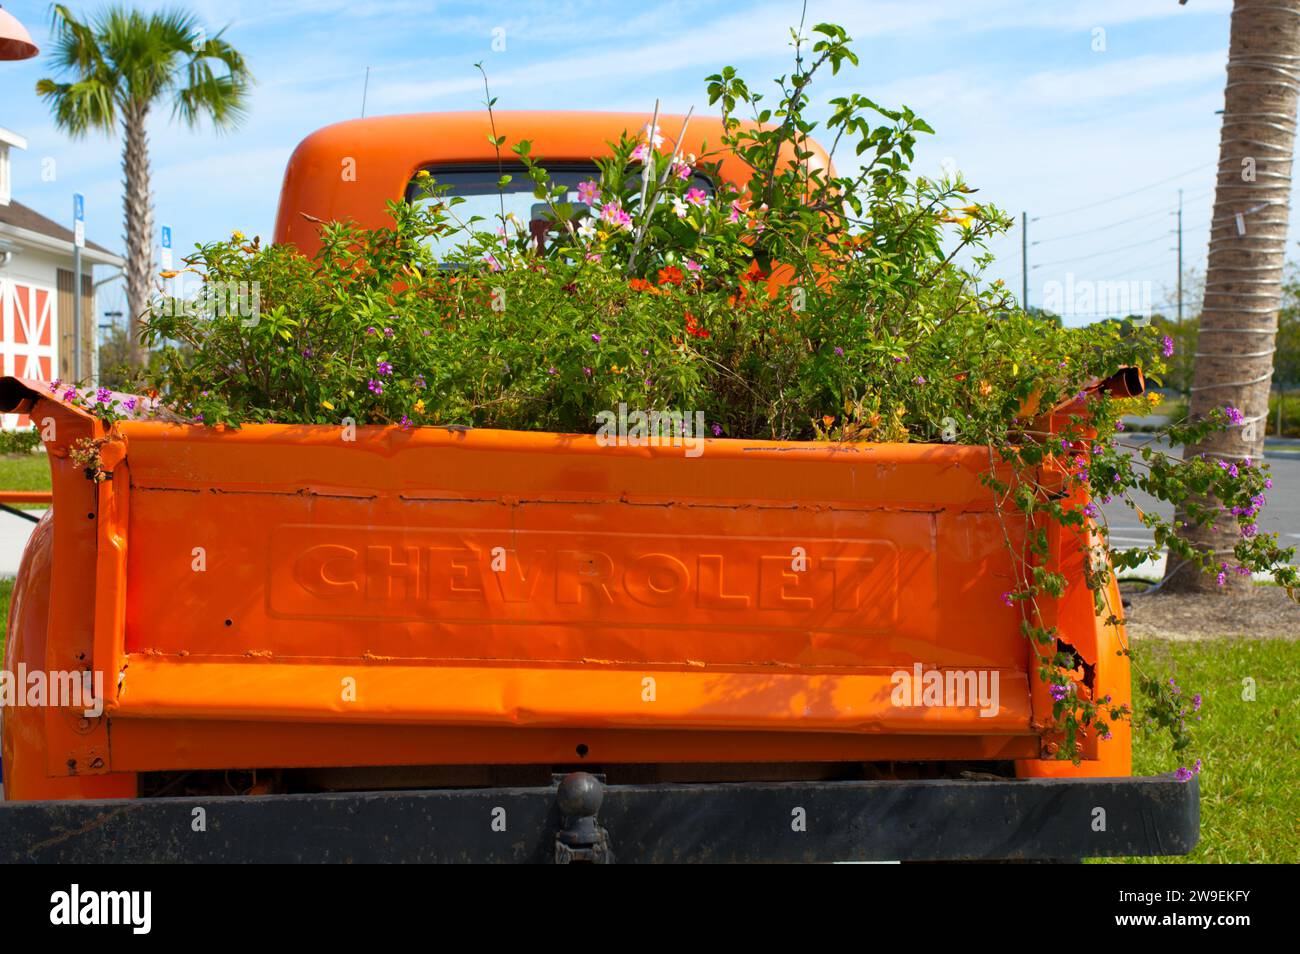 Ocala, Florida November 26, 2023 old vintage Chevrolet Pickup, unique orange vintage truck car with various color wildflowers in the back bed, blue sk Stock Photo